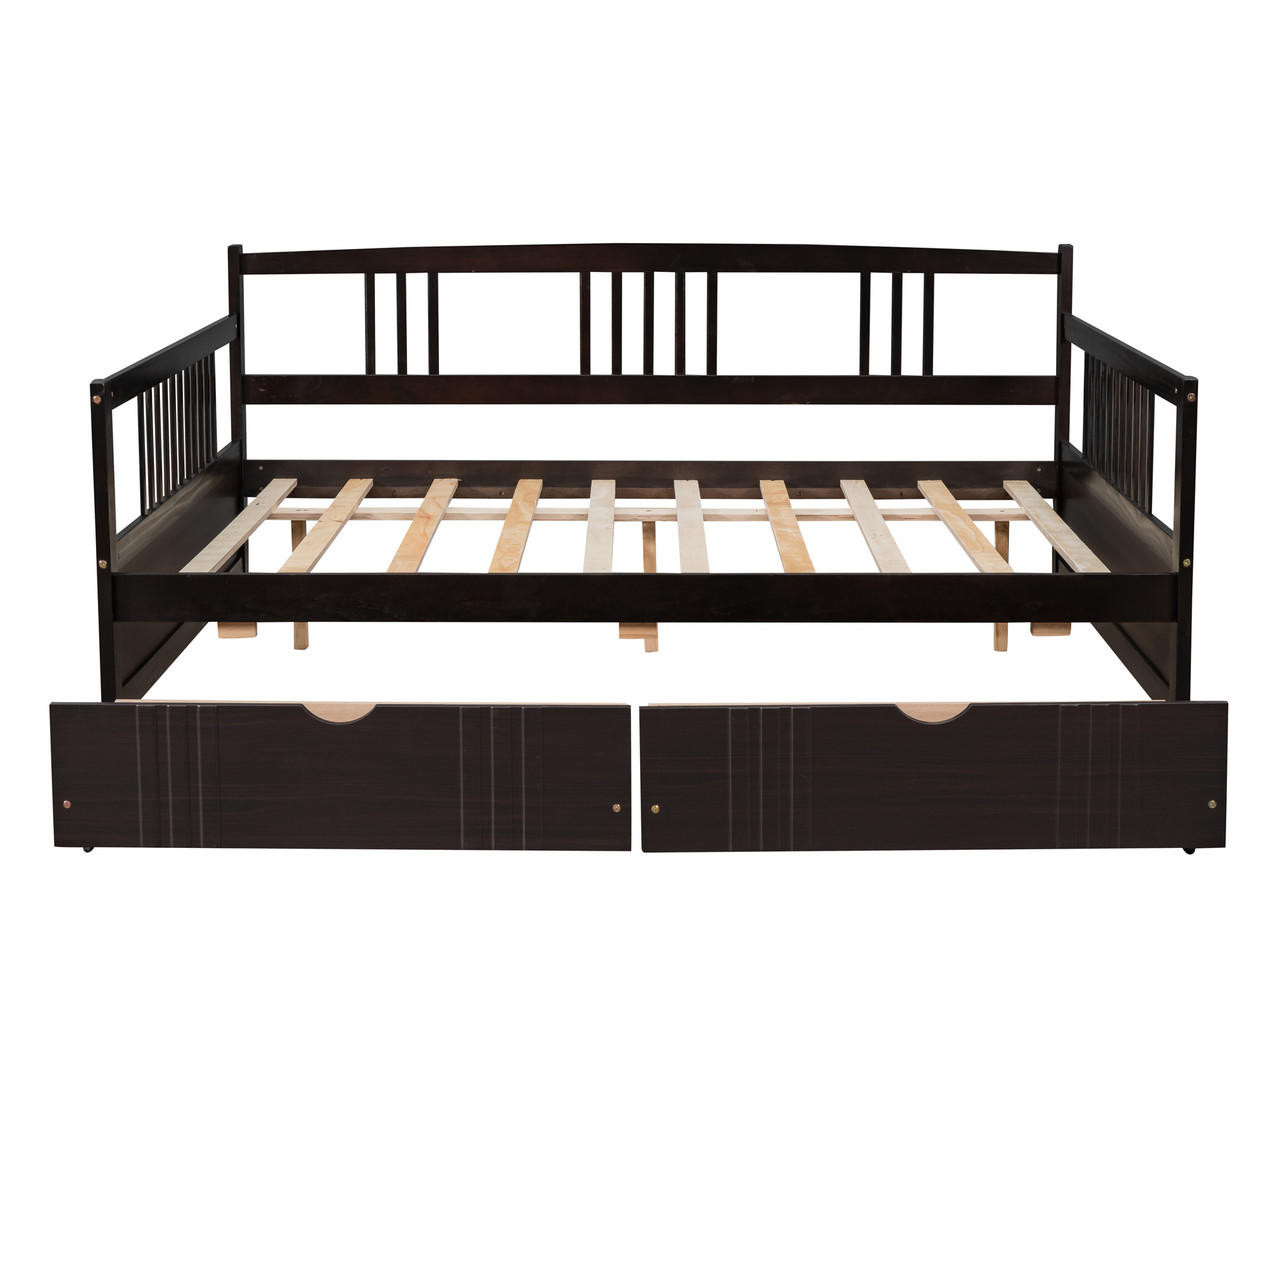 Chicken Pieces Full Size Daybed Wood Bed with Two Drawers | Space-Saving and Functional Design 